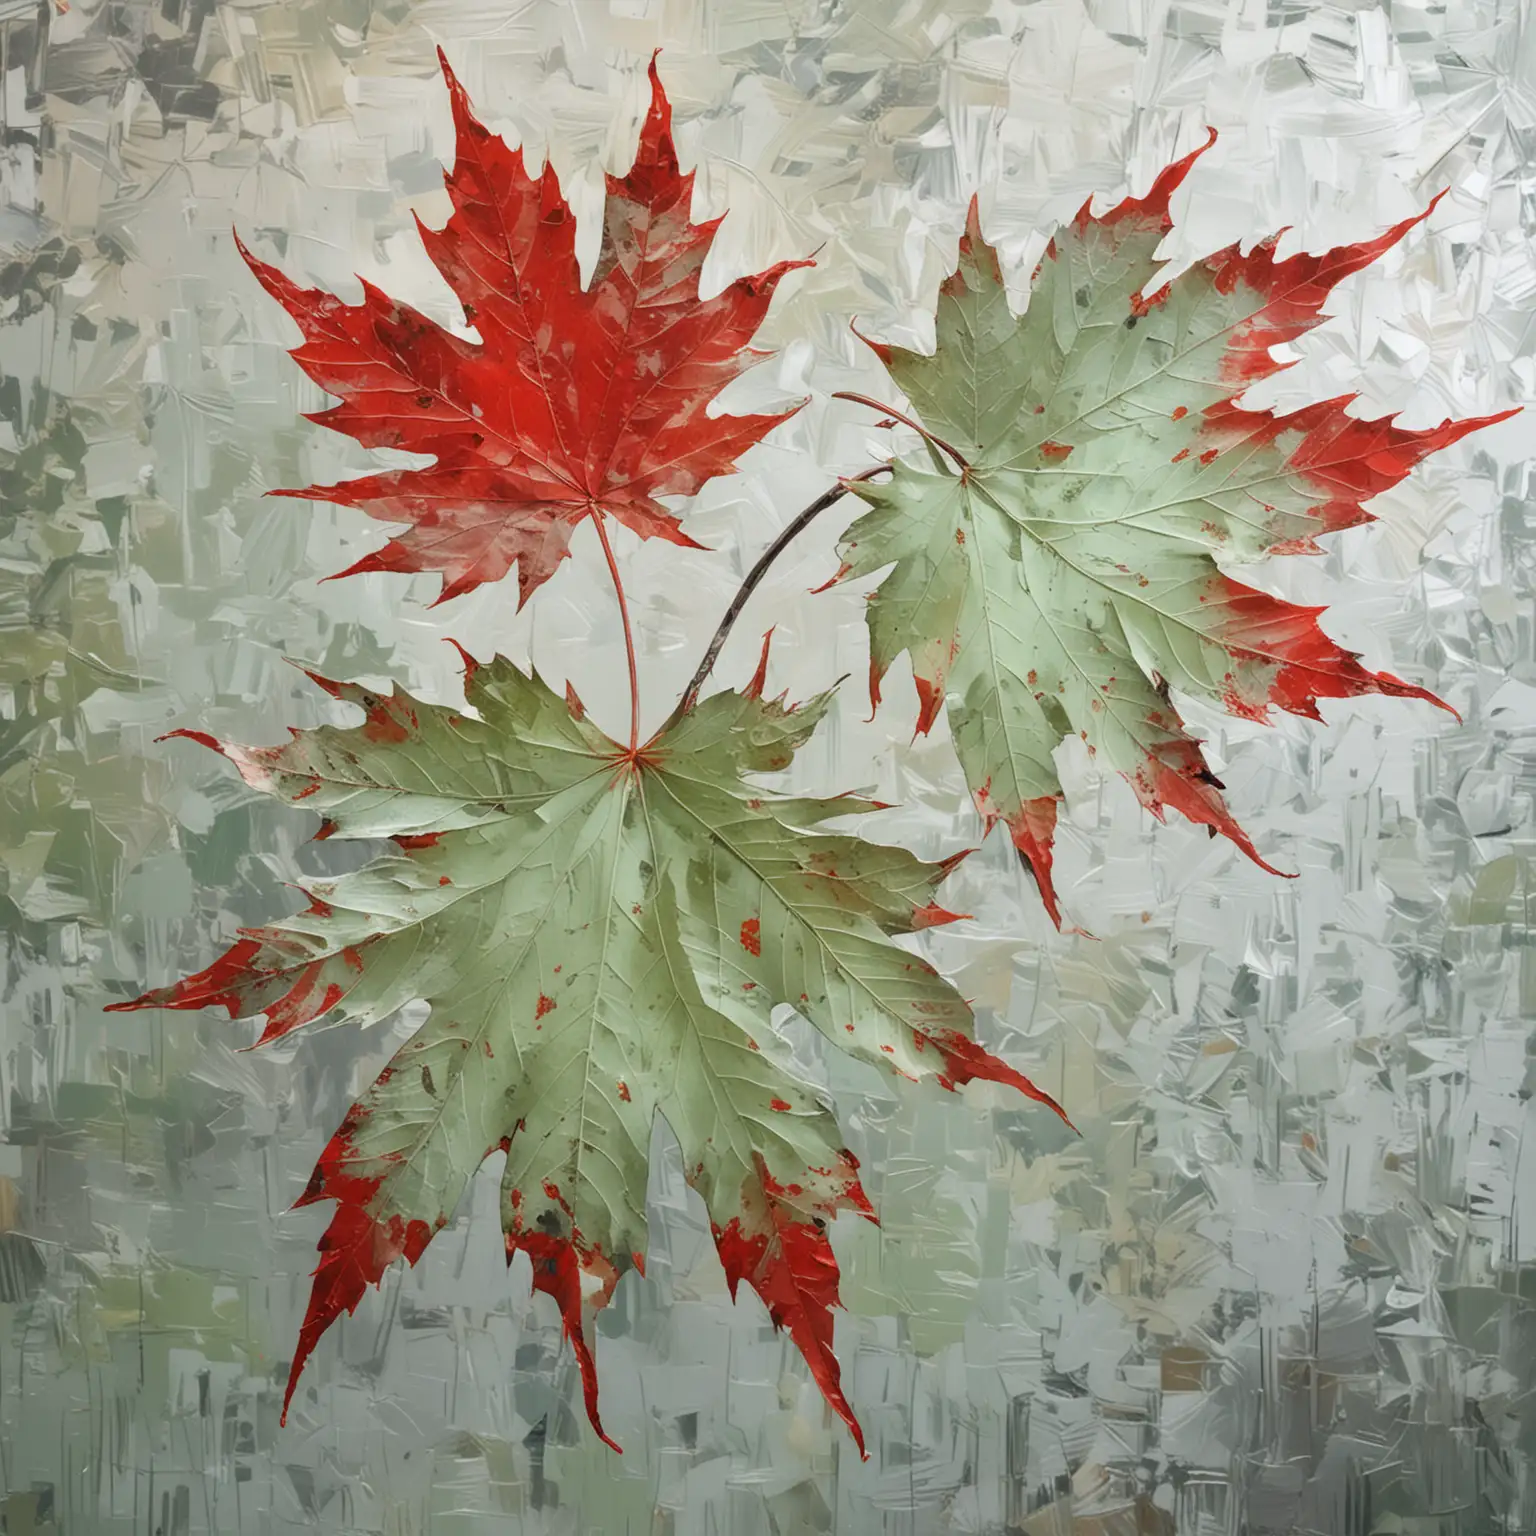 abstract with bright silver background, very large pale green and red maple leaves in foreground